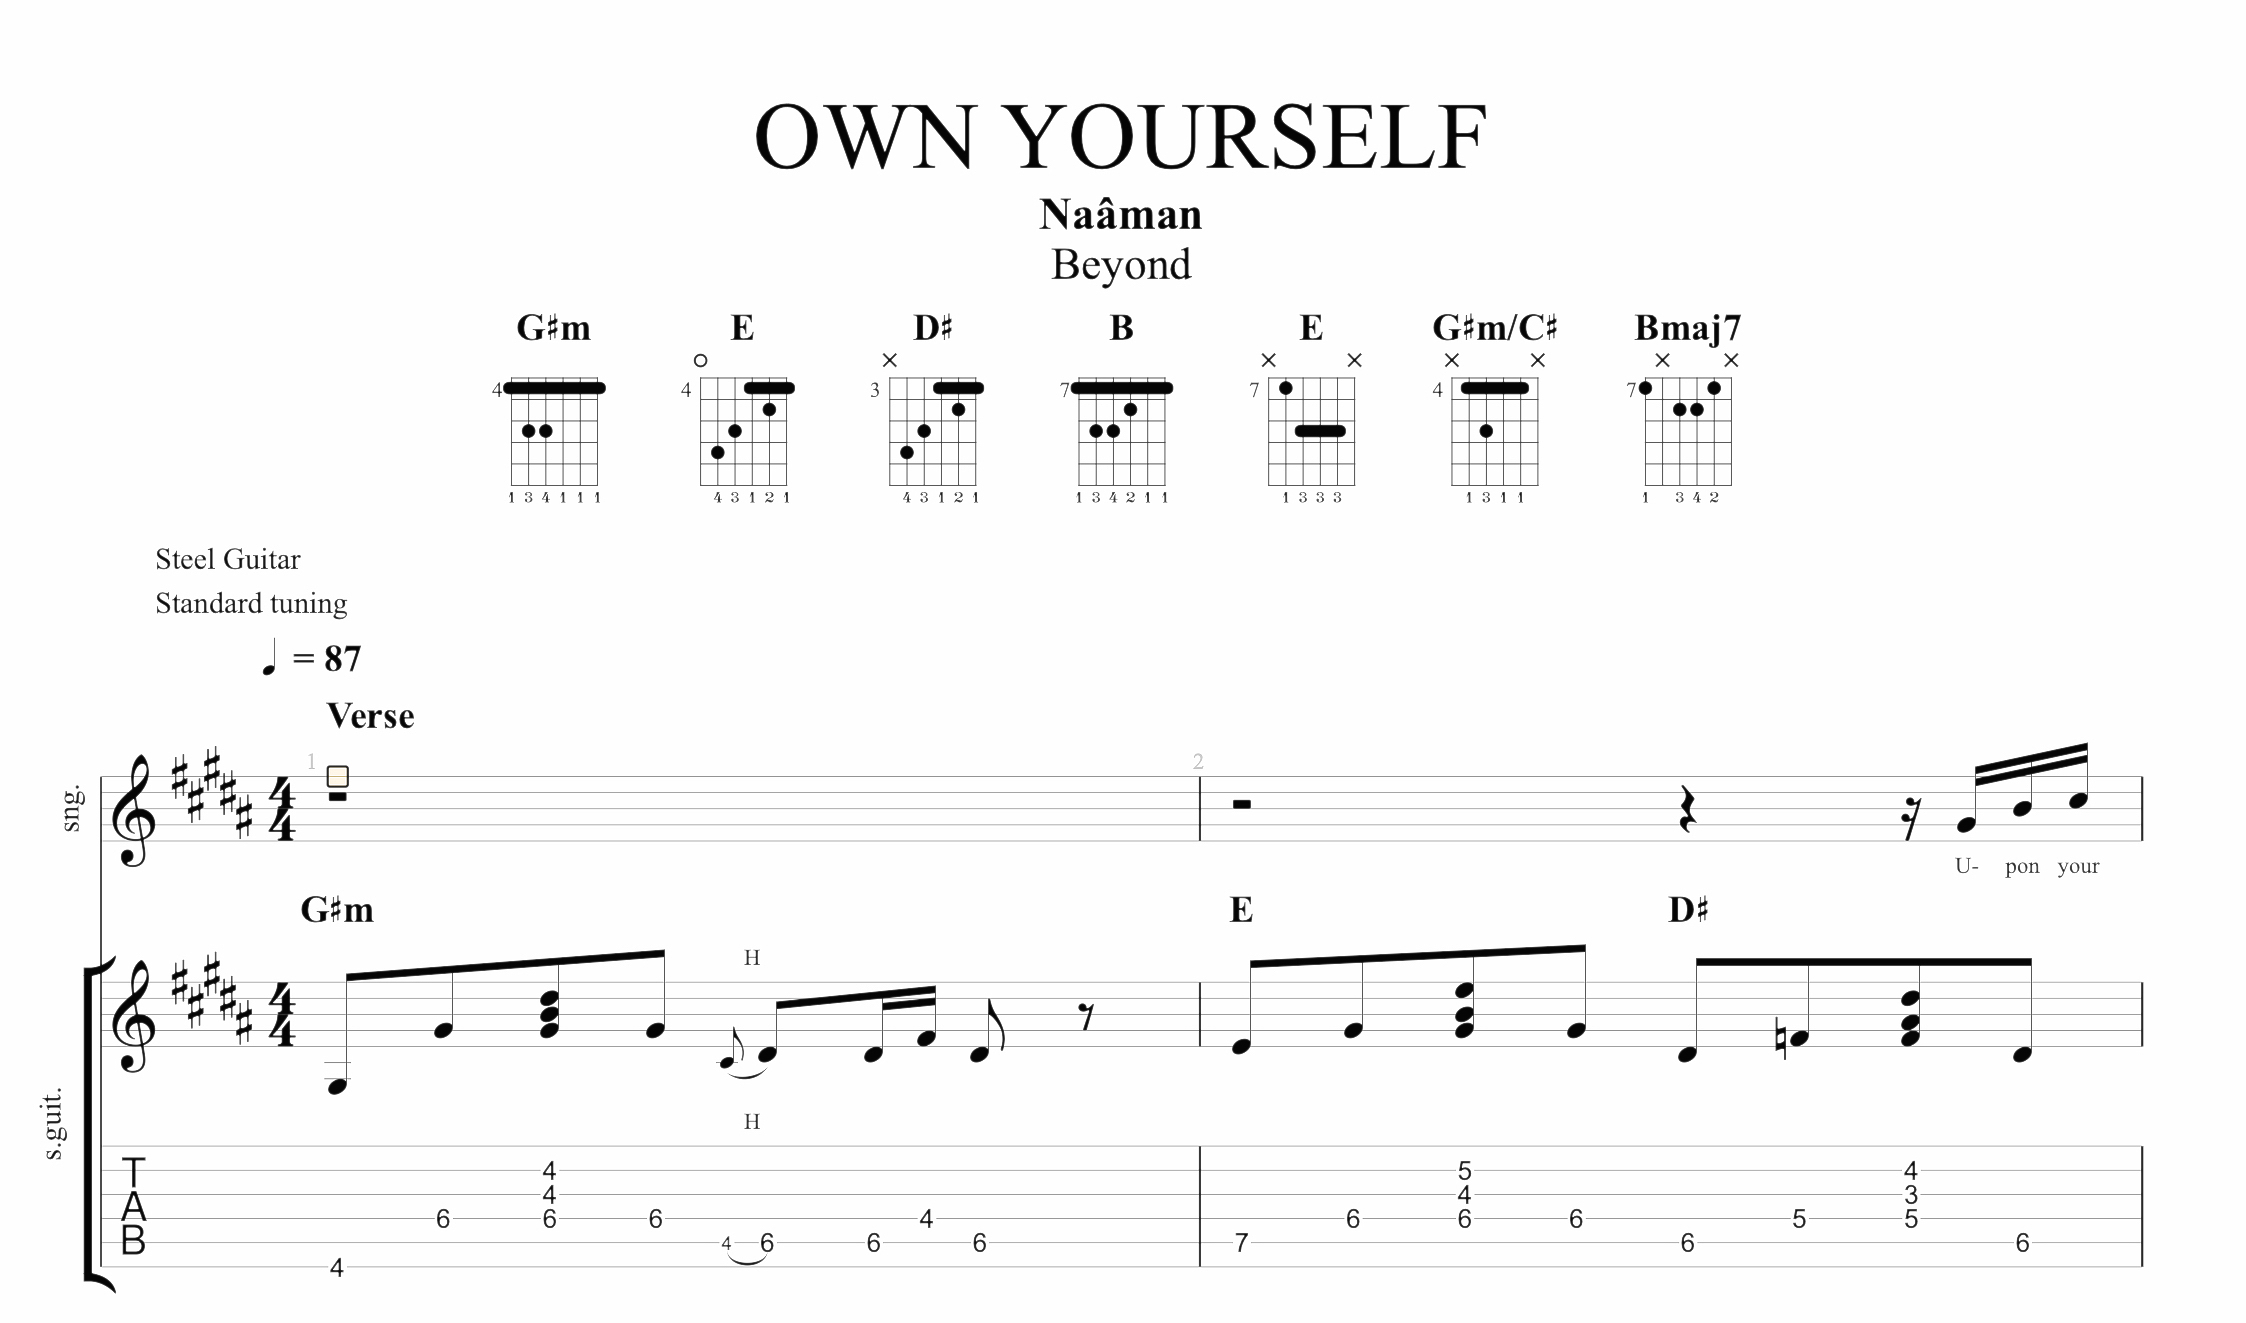 Fix You Chords Tuto 10 Tips To Give A Professional Look To Your Scores In Guitar